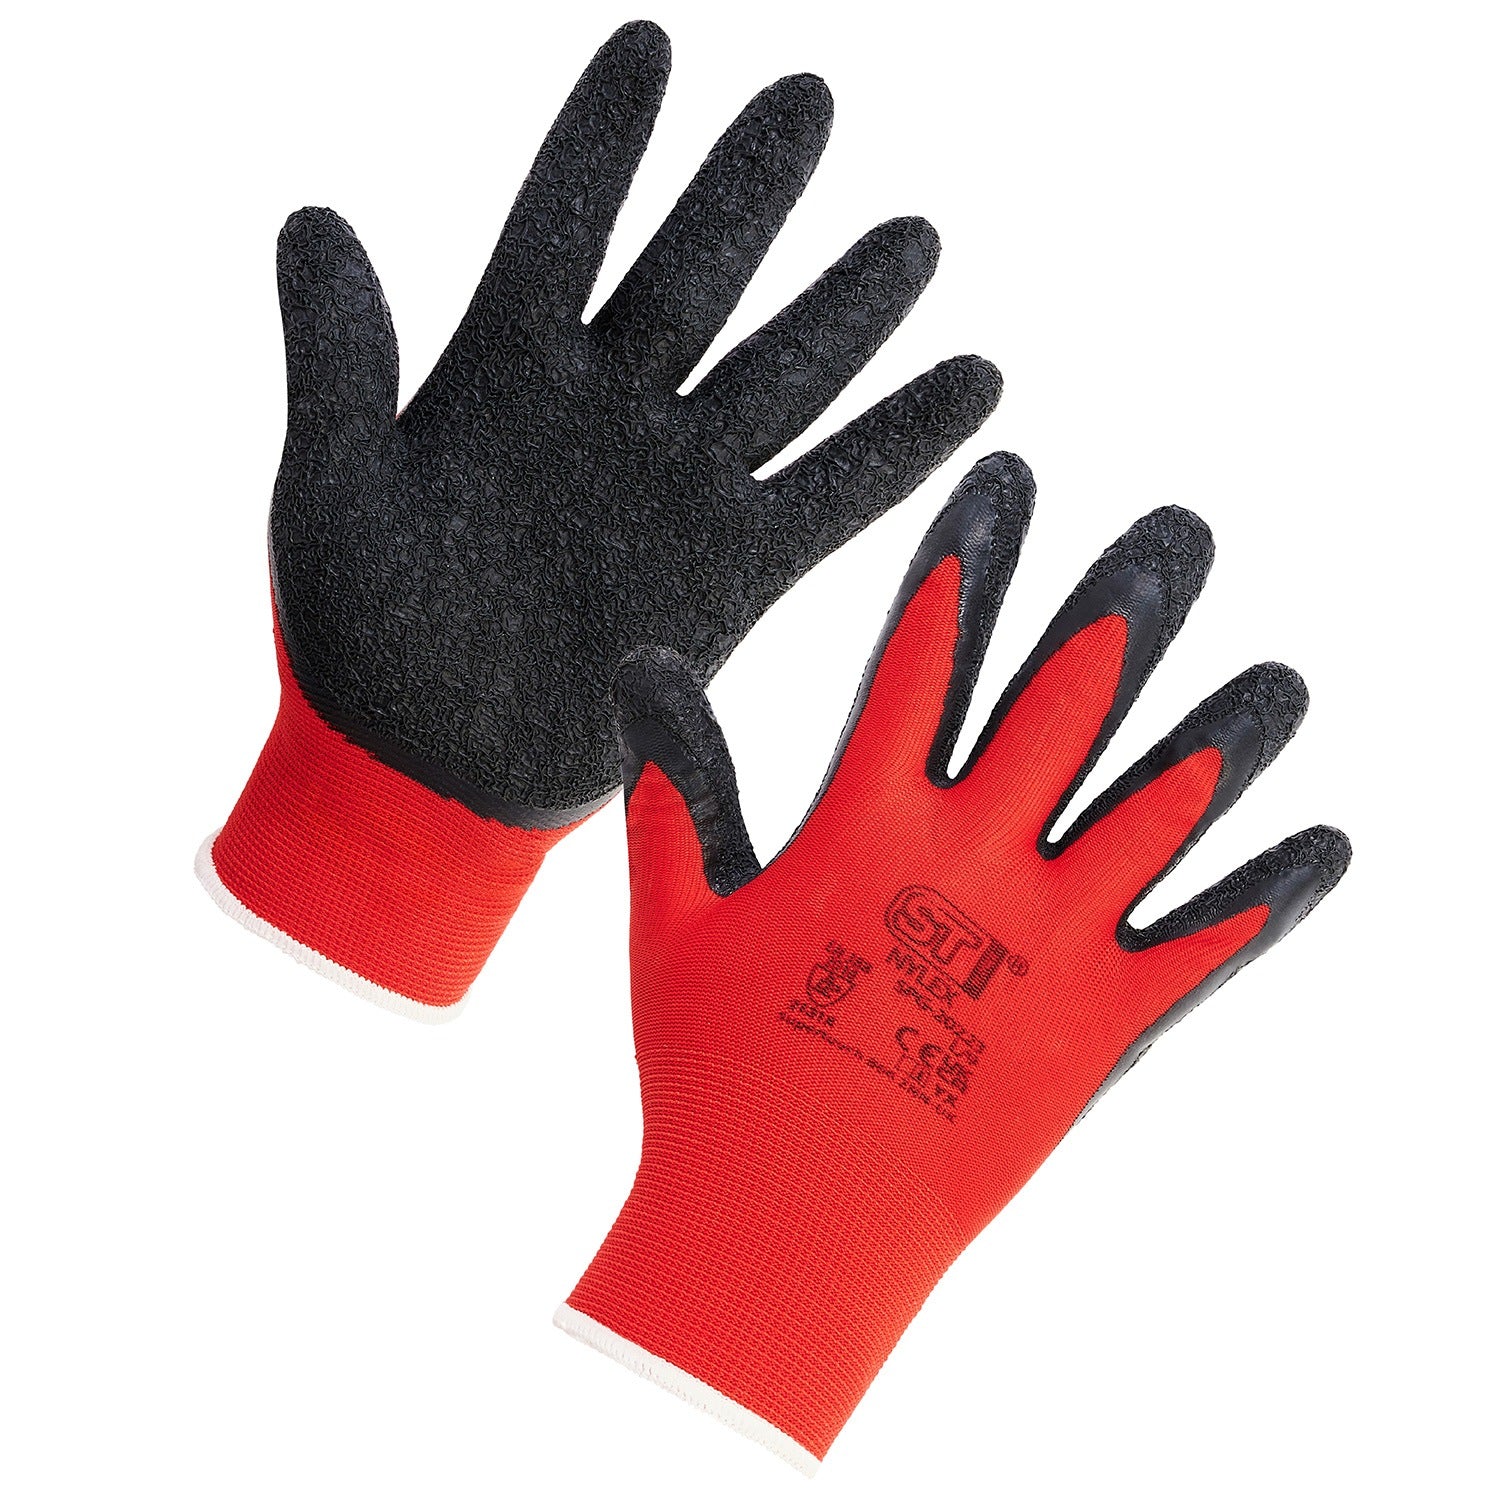 Supertouch Supertouch Nylex Gloves - G109